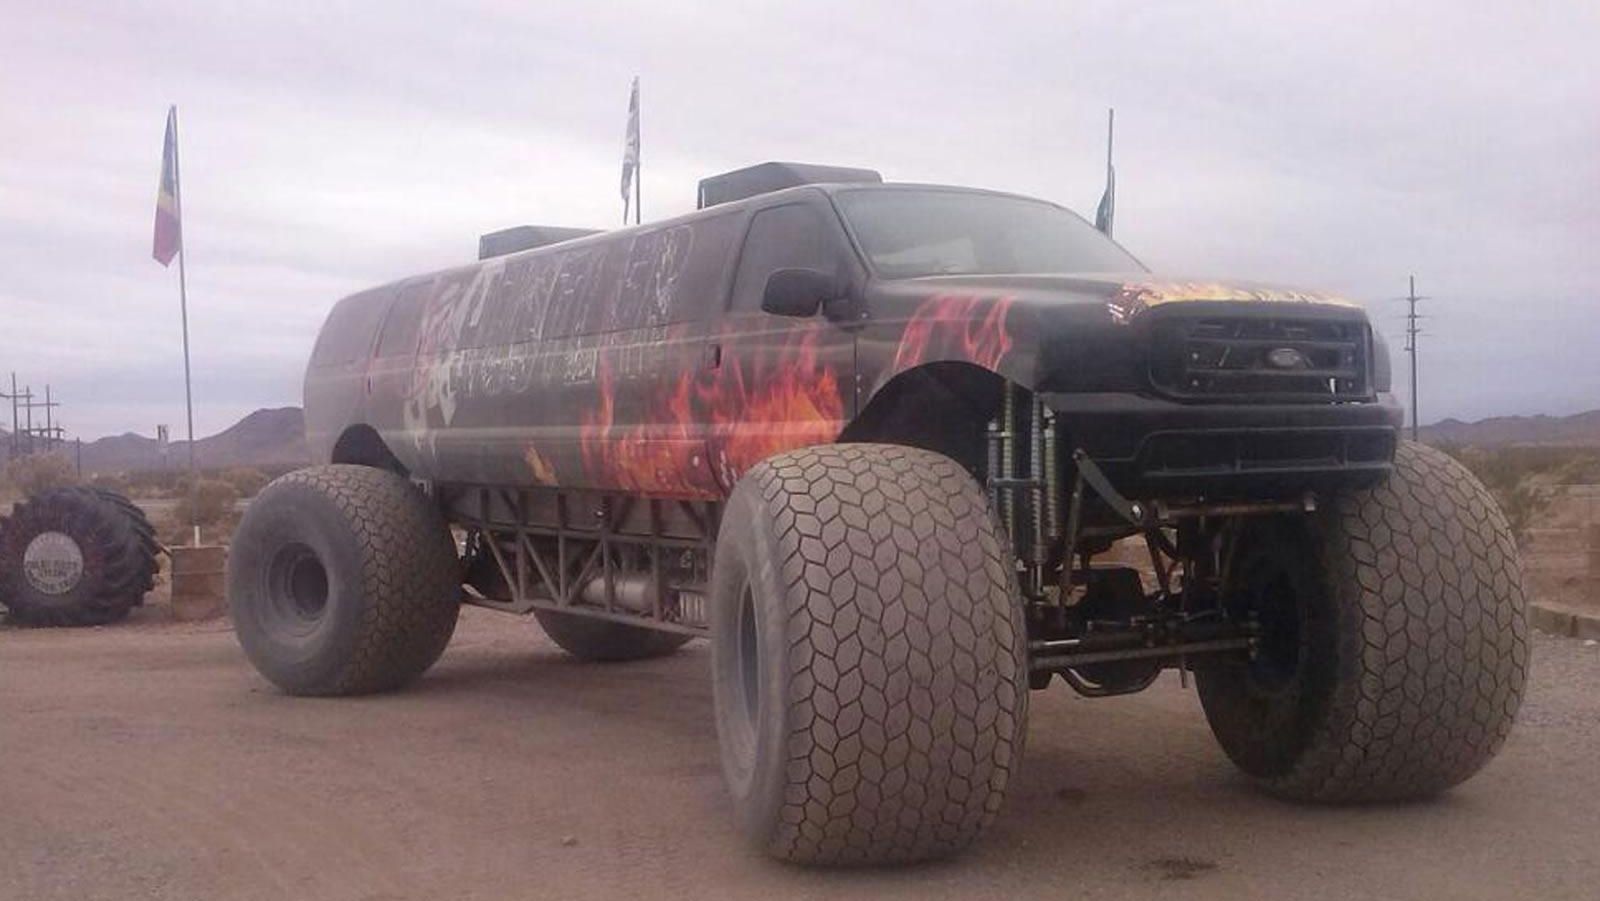 Why Is This One-Off $1 Million Monster Truck Still For Sale?